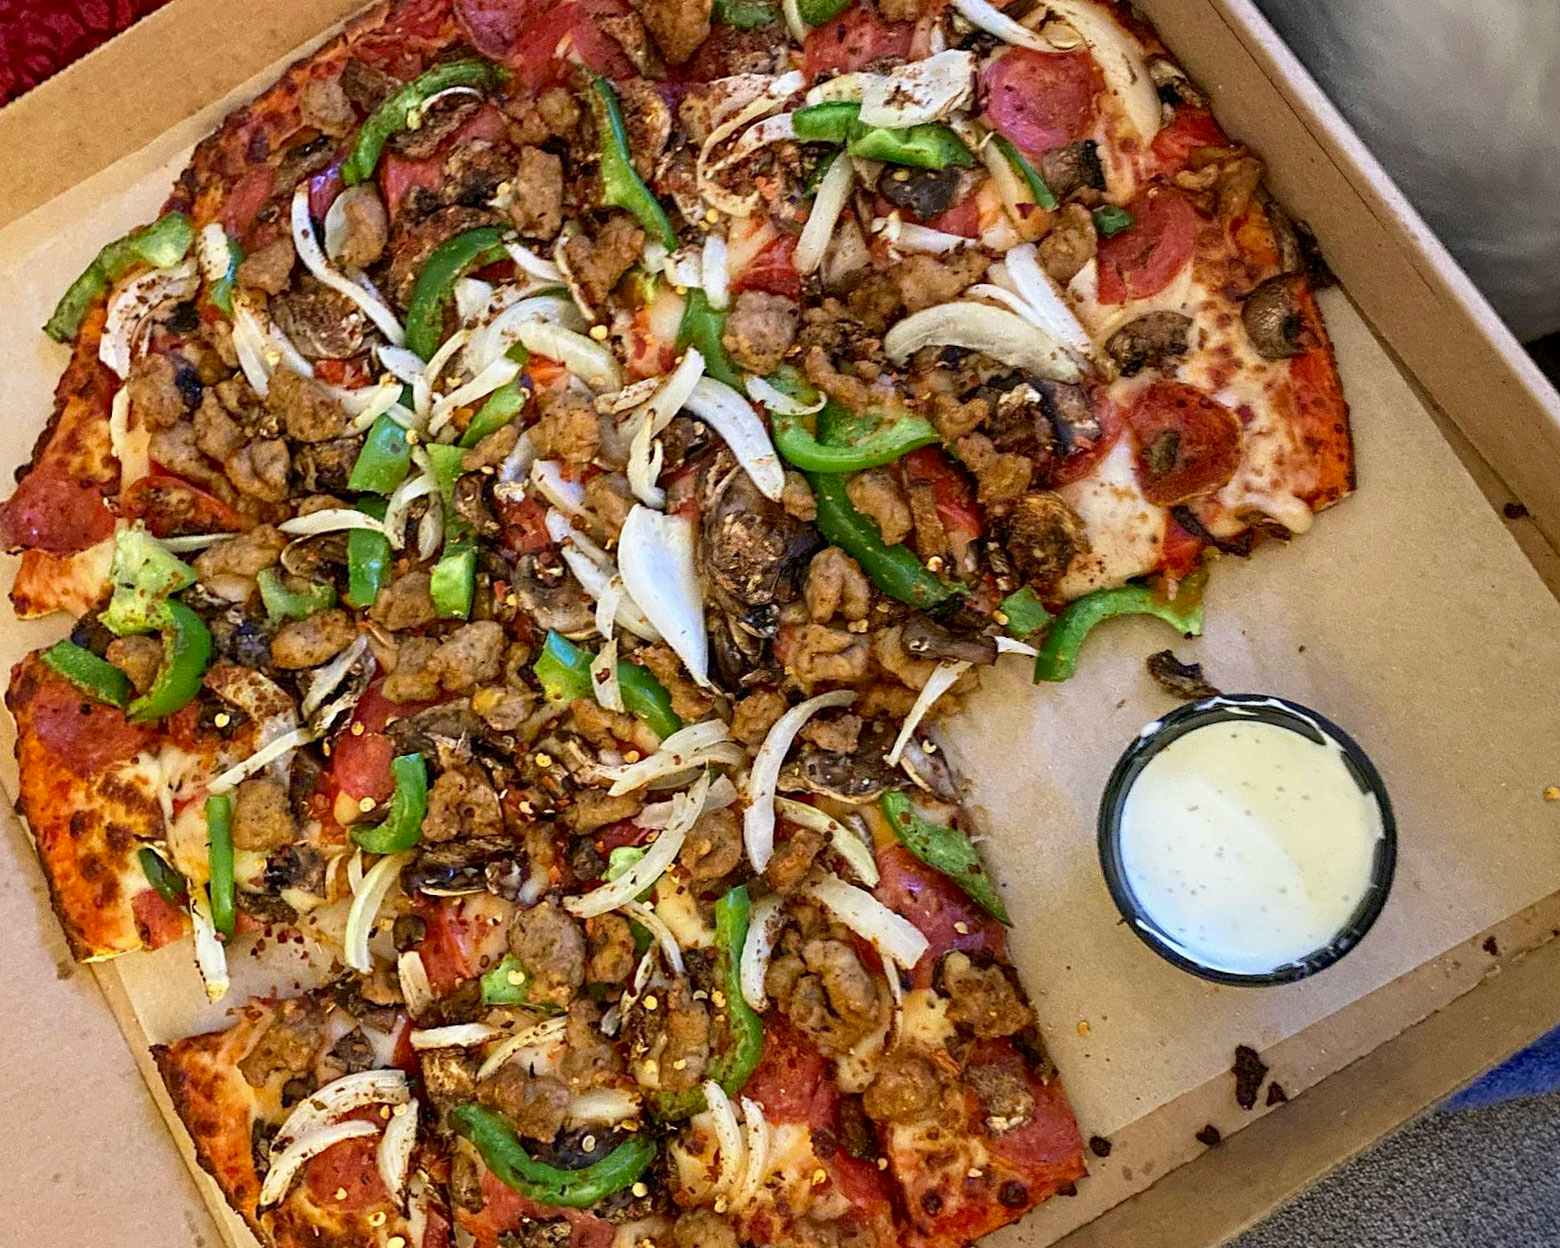 A supreme pizza with a piece taken out, sitting in a pizza box next to a dipping cup of ranch.